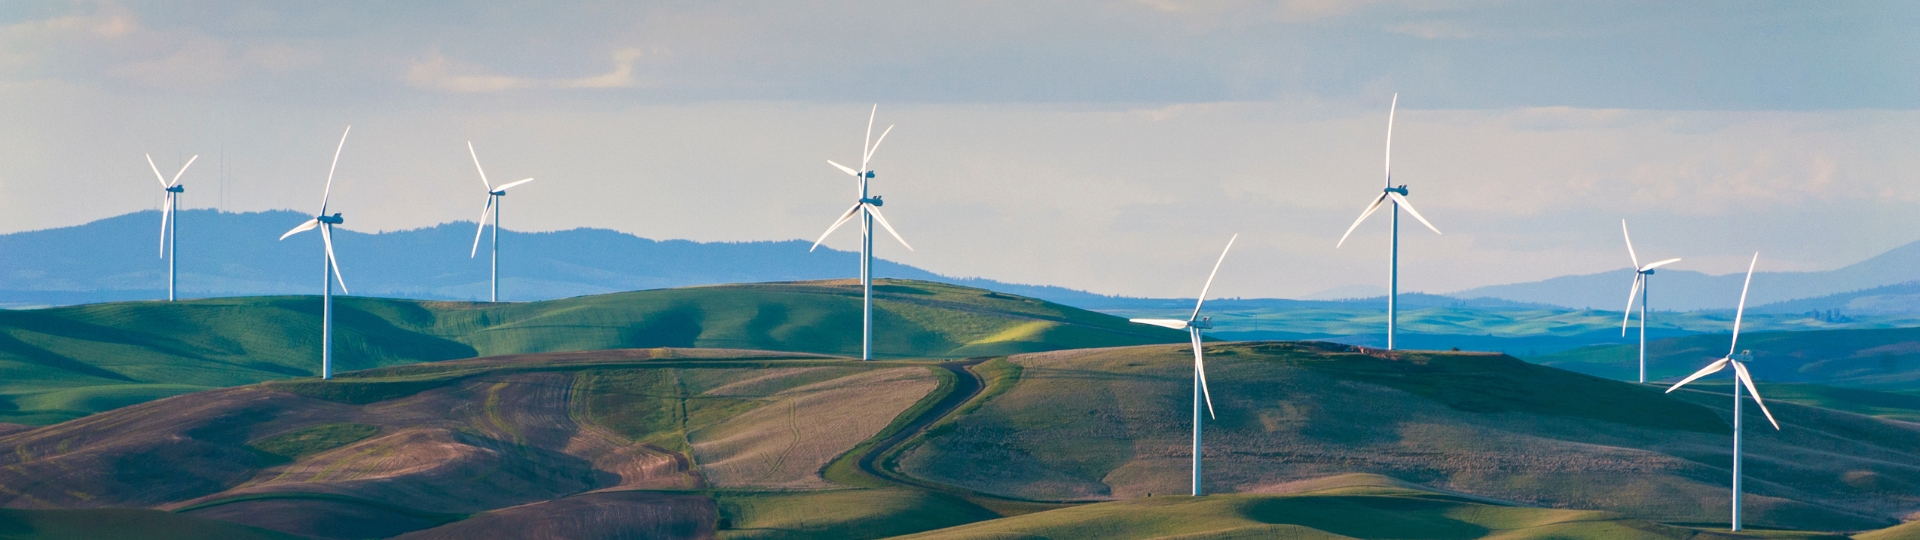 Wind Turbines in a hilly landscape